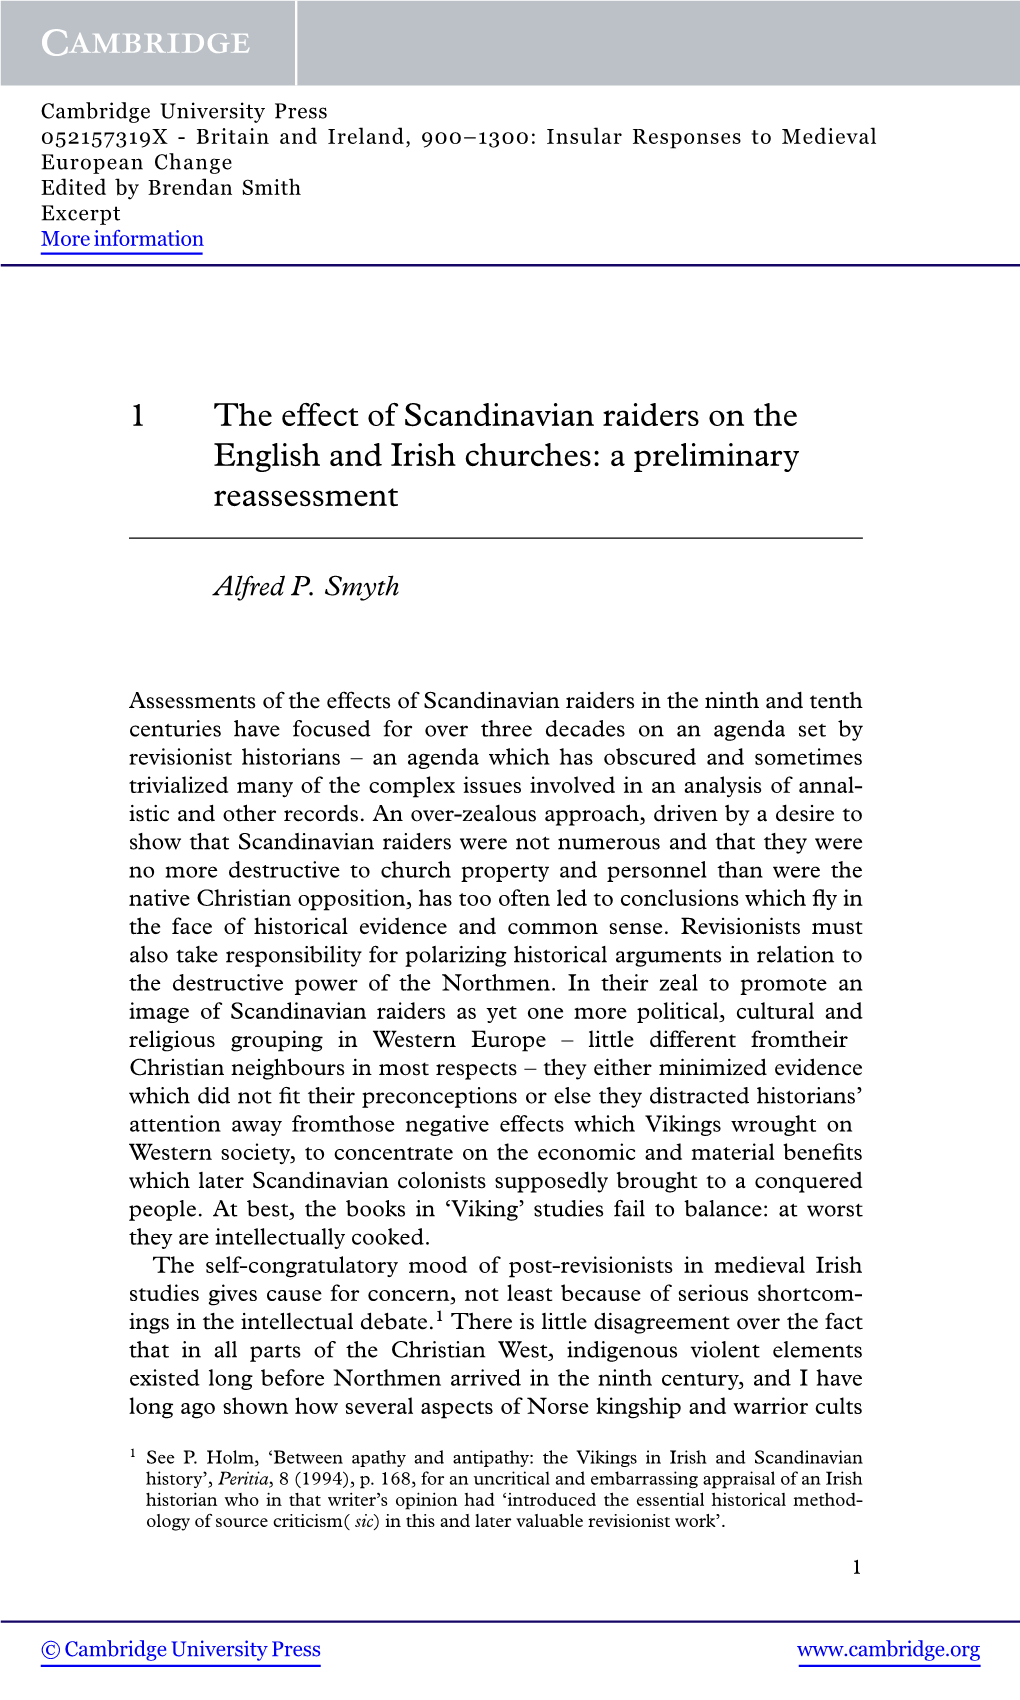 1 the Effect of Scandinavian Raiders on the English and Irish Churches: a Preliminary Reassessment